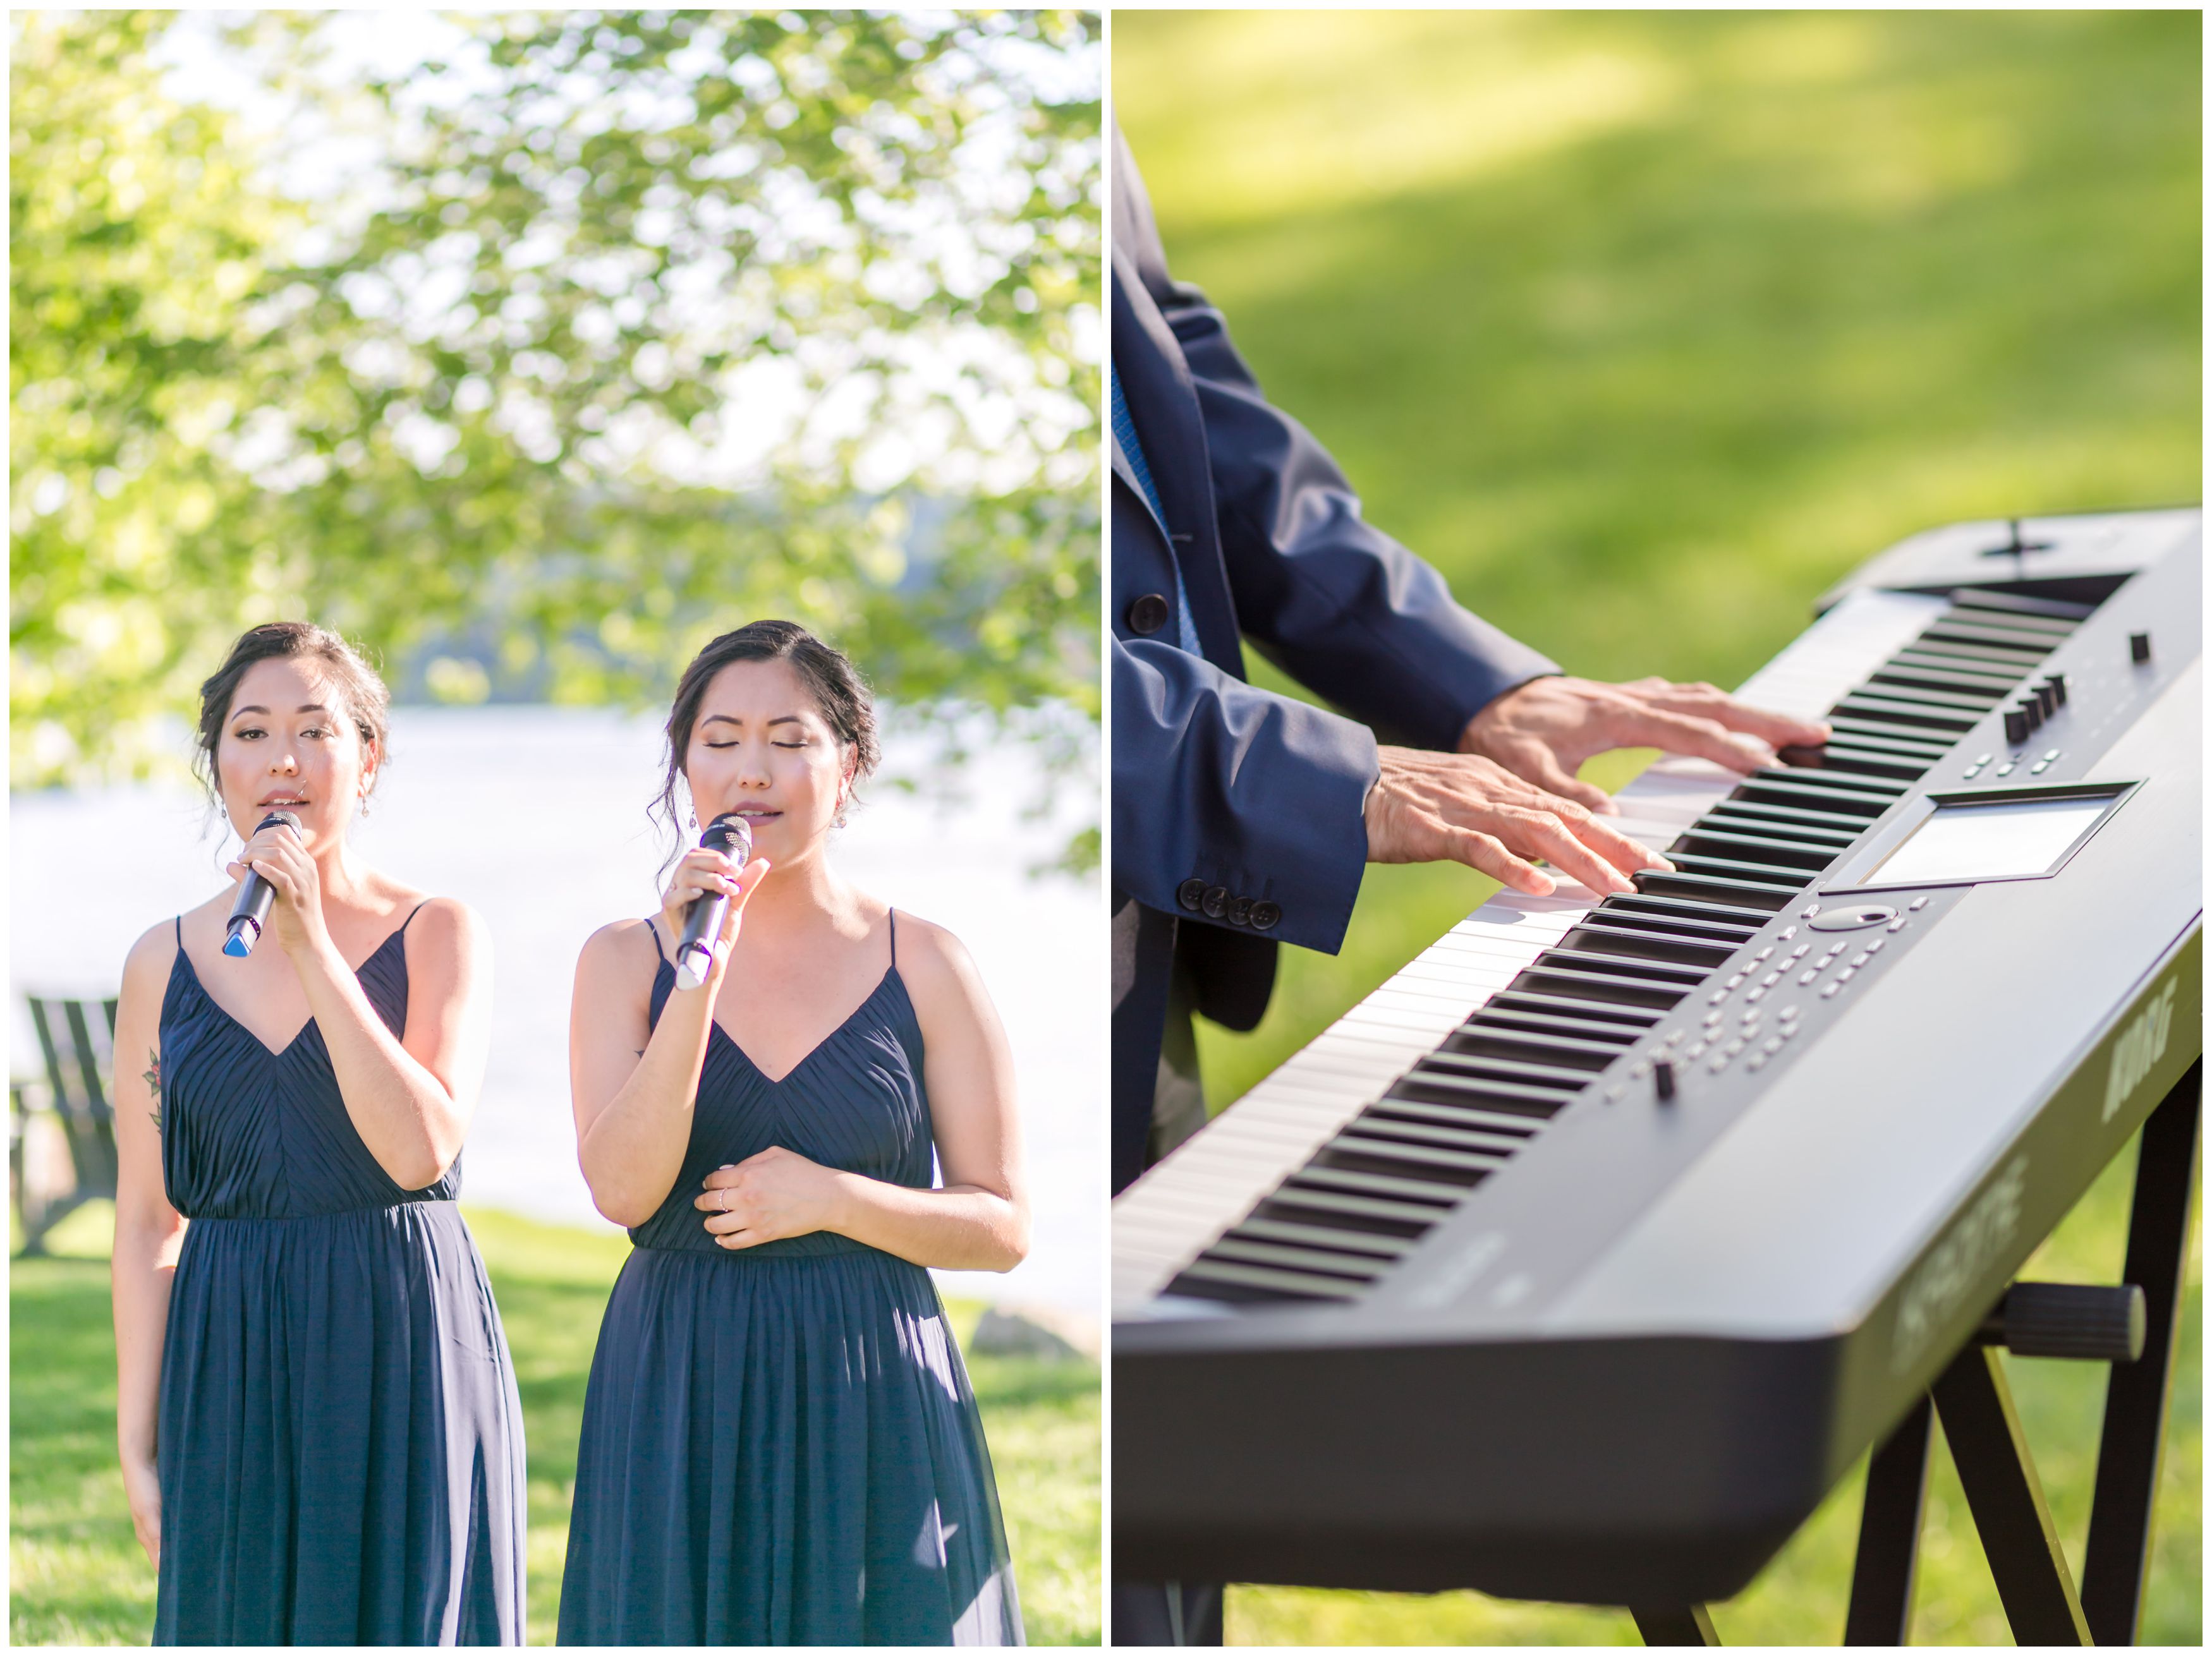 Sisters singing and piano music outdoor lakeside ceremony